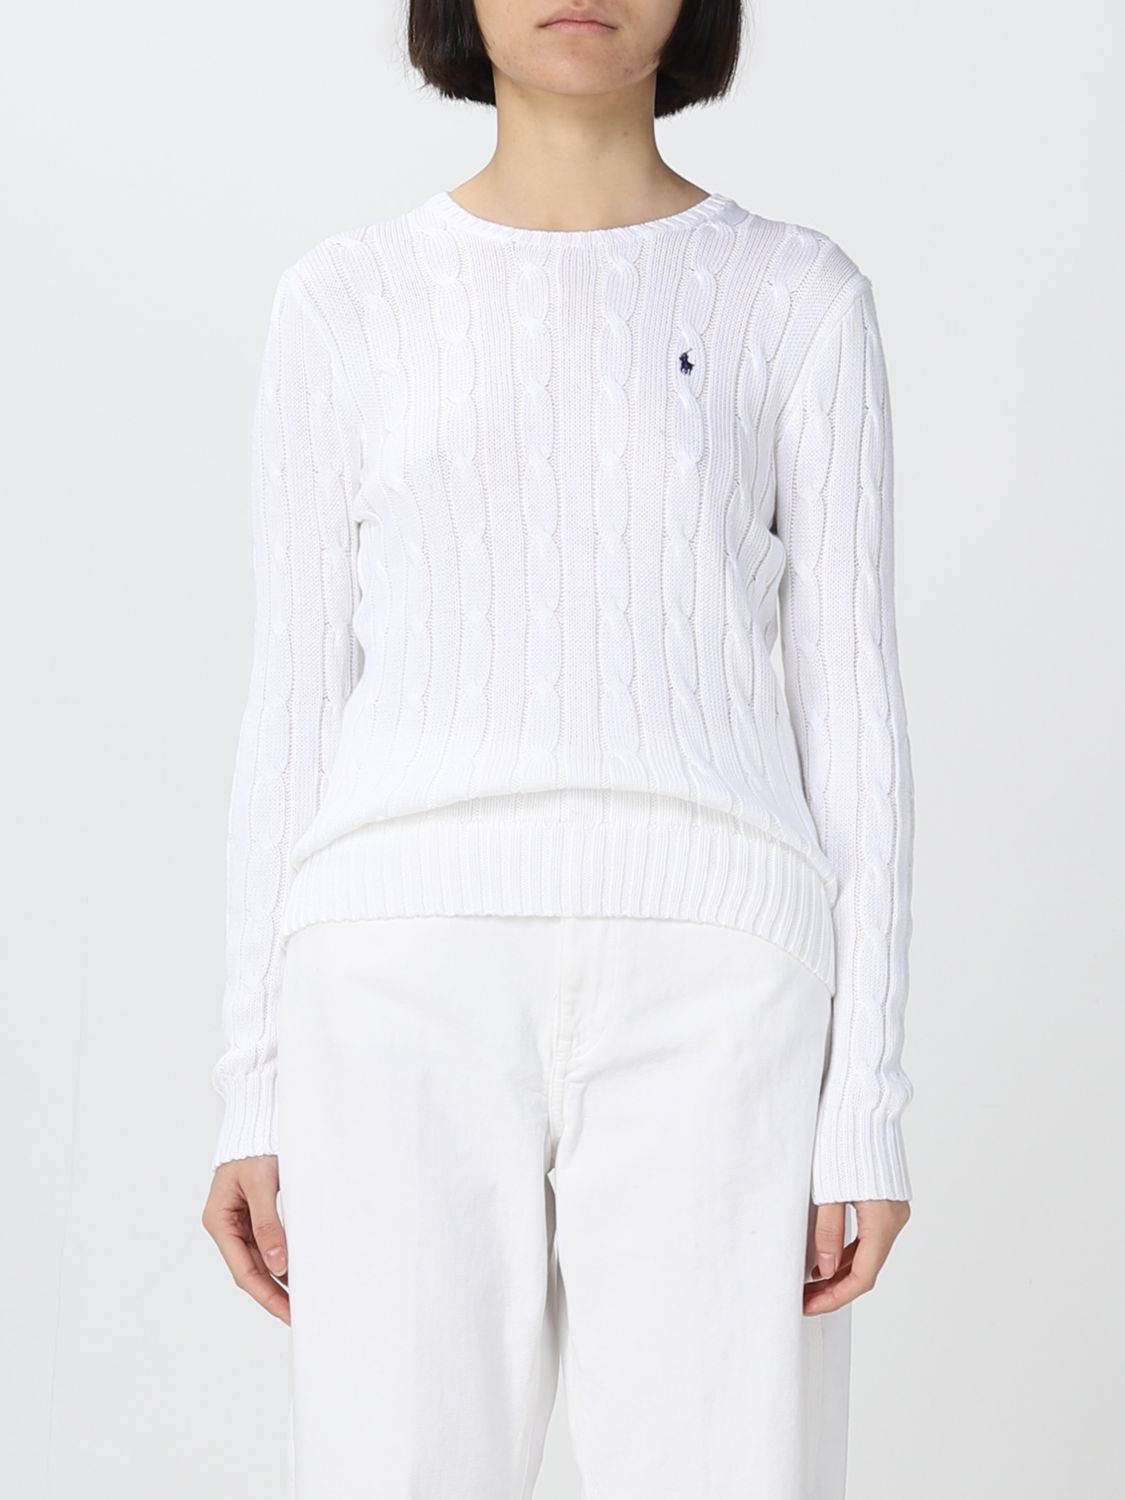 POLO RALPH LAUREN: sweater for woman - White | Polo Ralph Lauren sweater  211891640 online on 